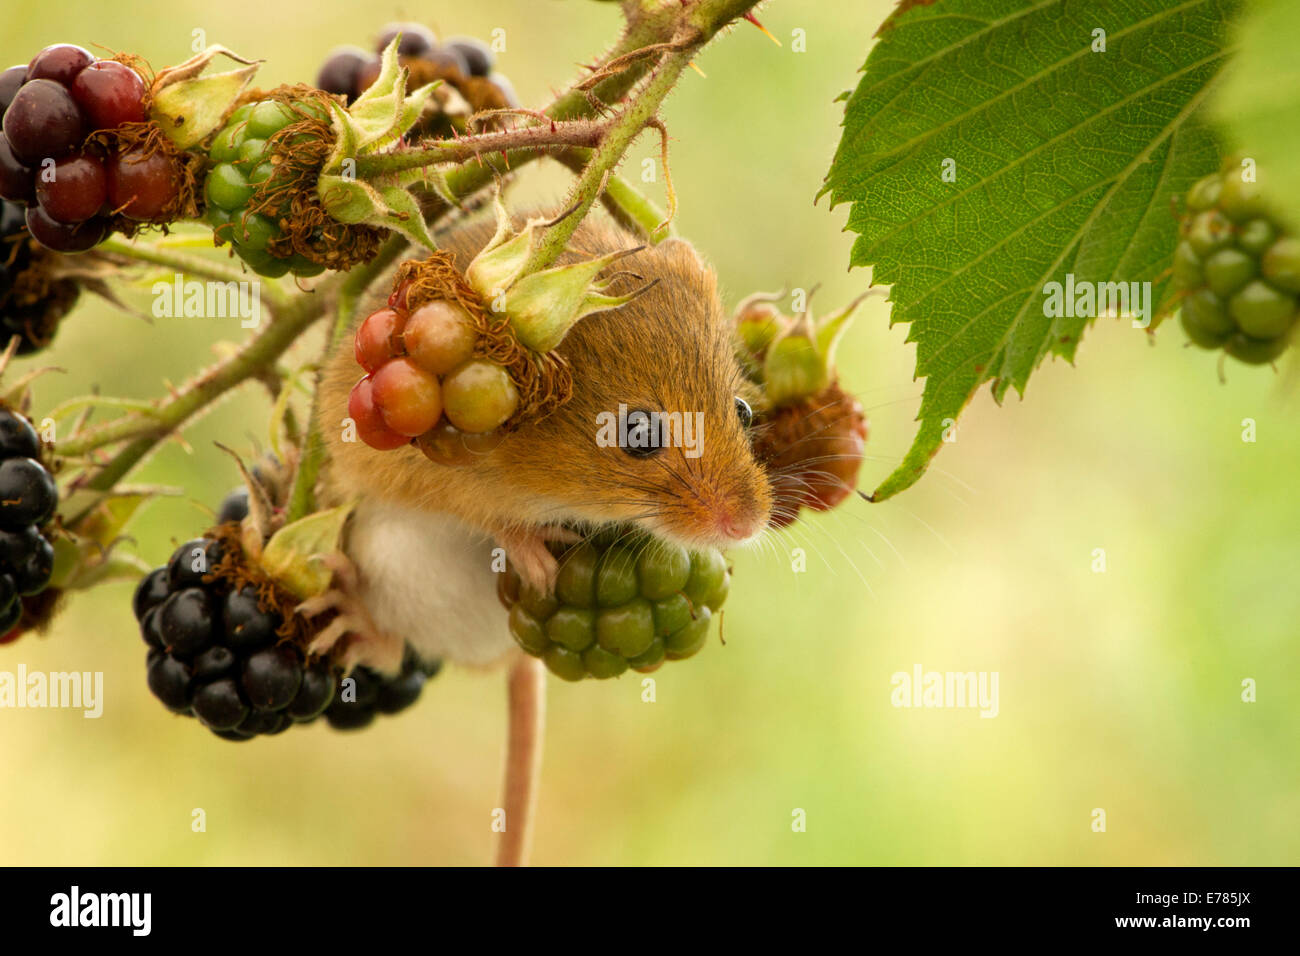 Harvest Mouse Stock Photo